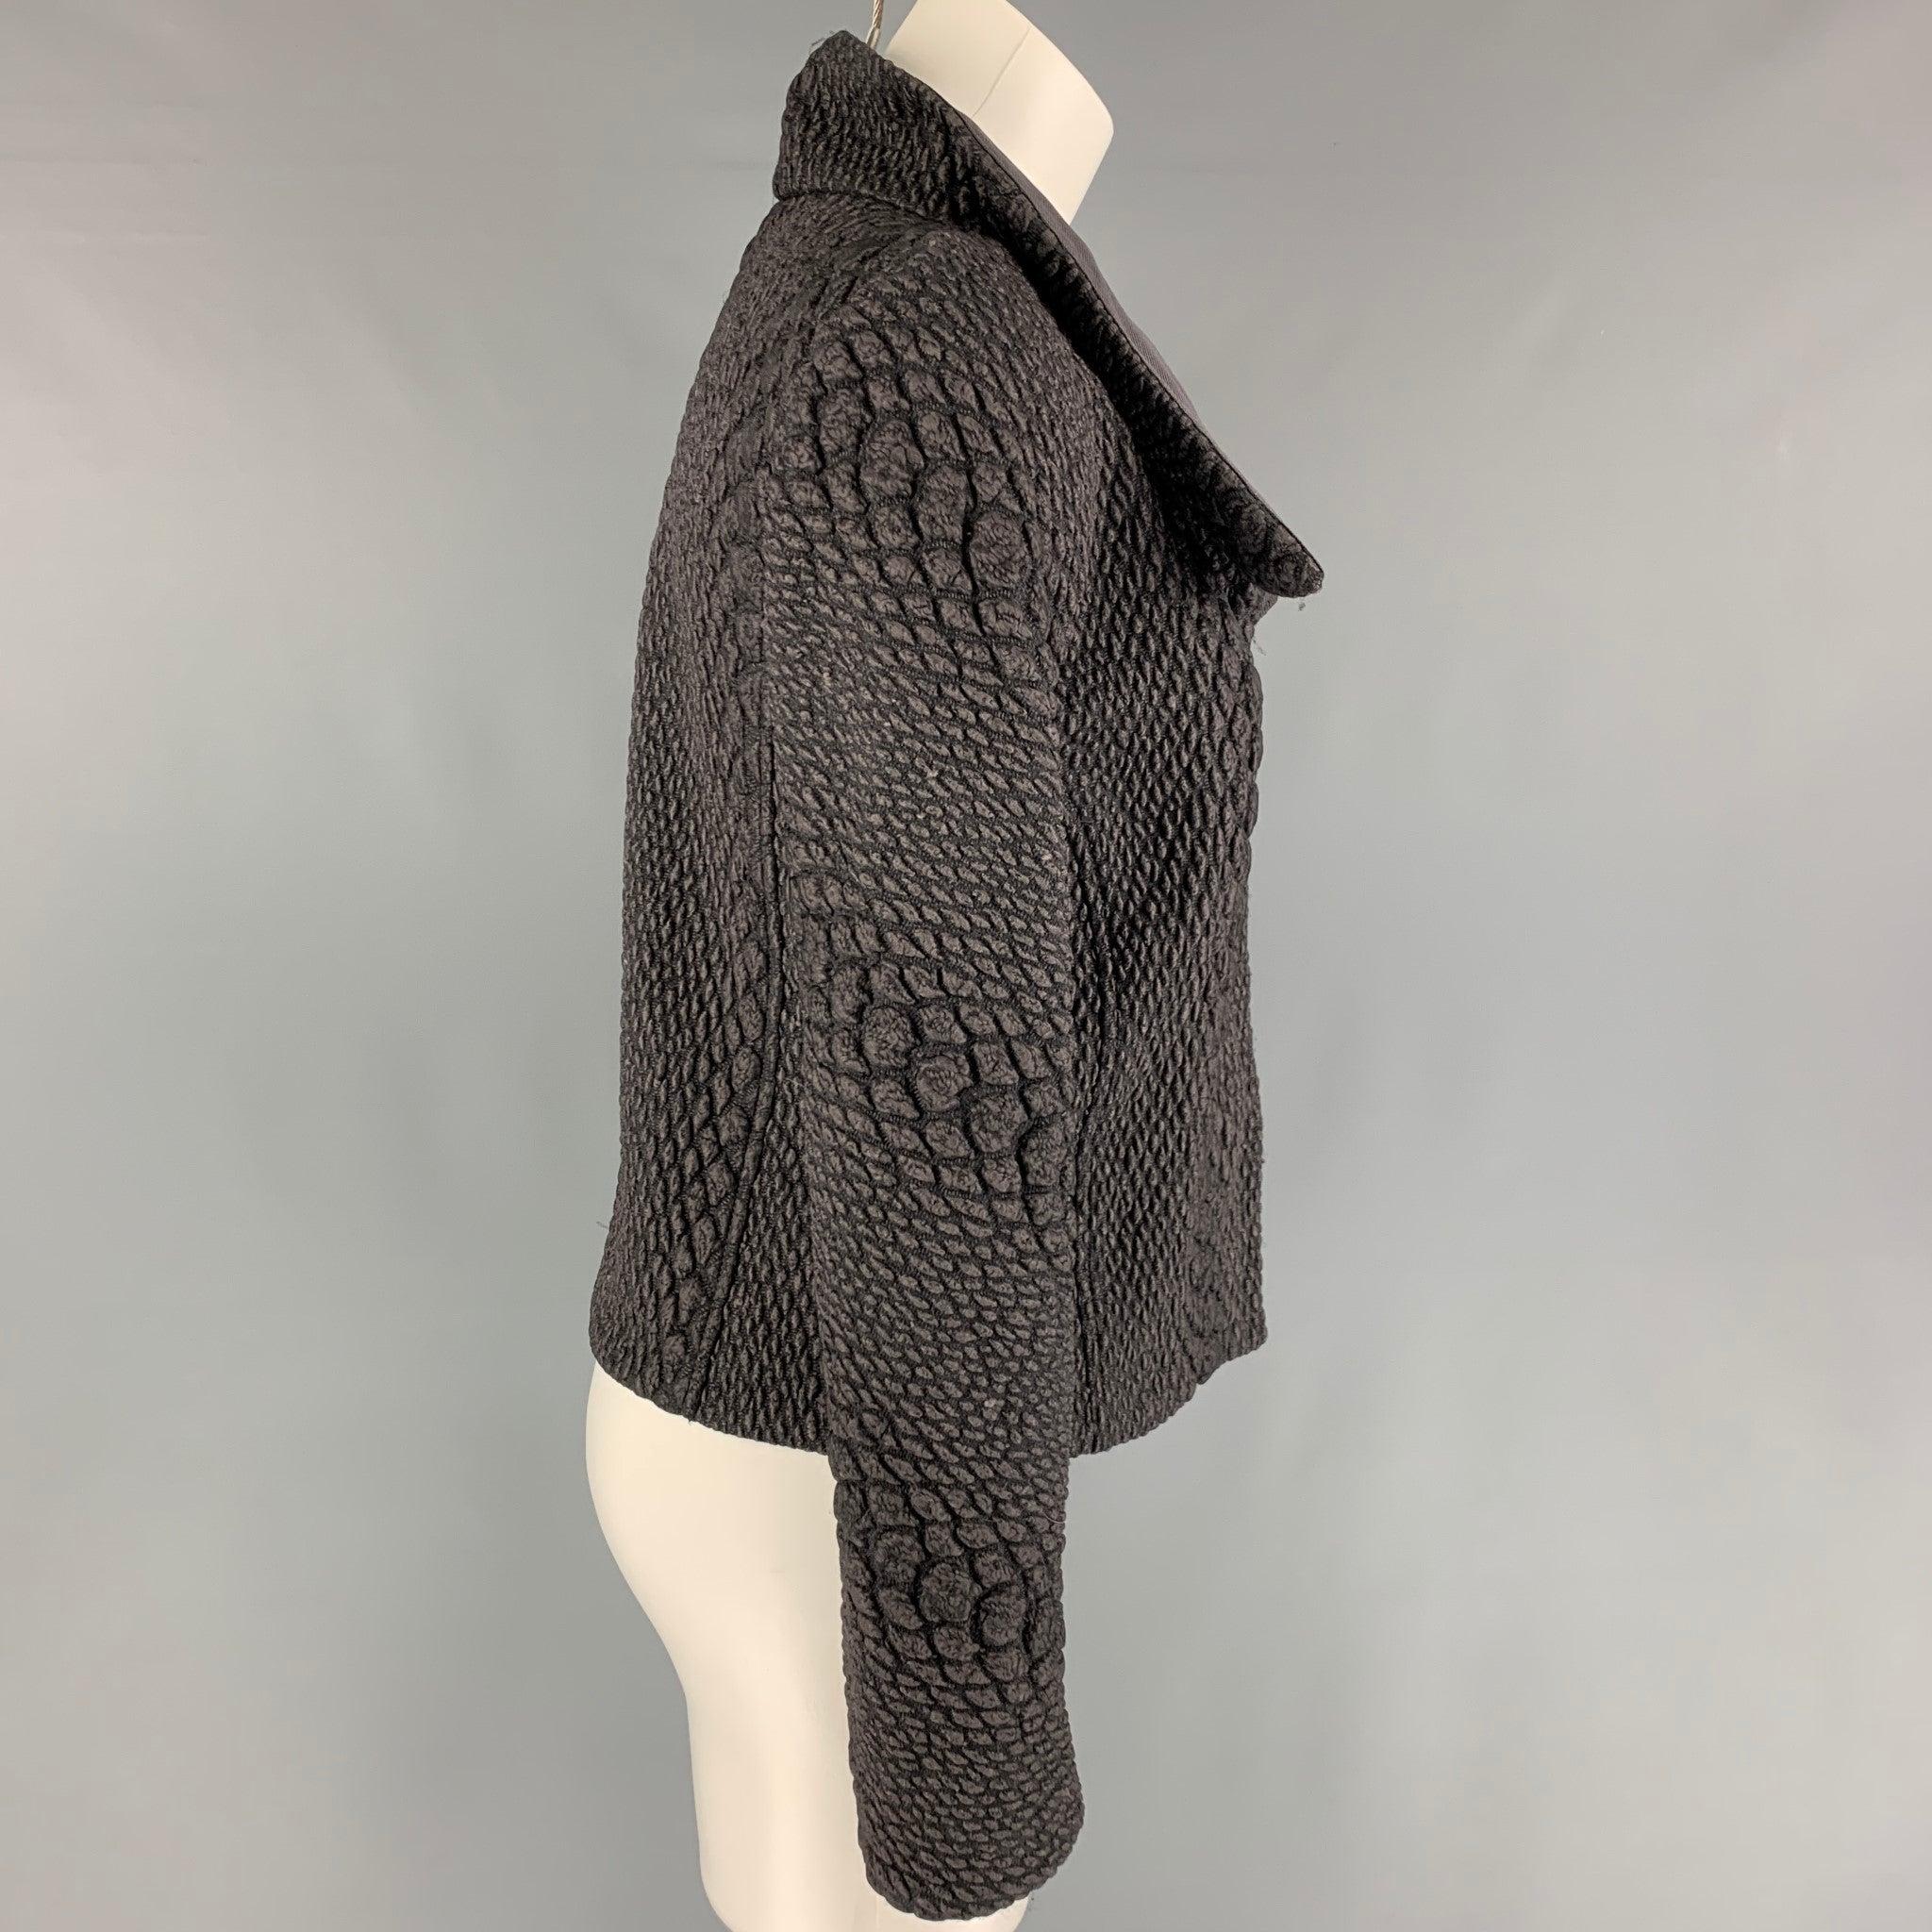 GIORGIO ARMANI jacket comes in a charcoal & grey textured wool blend featuring a high collar, and a asymmetrical zip up closure.
Very Good
Pre-Owned Condition. 

Marked:   40  

Measurements: 
 
Shoulder:
14.5 inches  Bust:
34 inches  Sleeve: 23.5